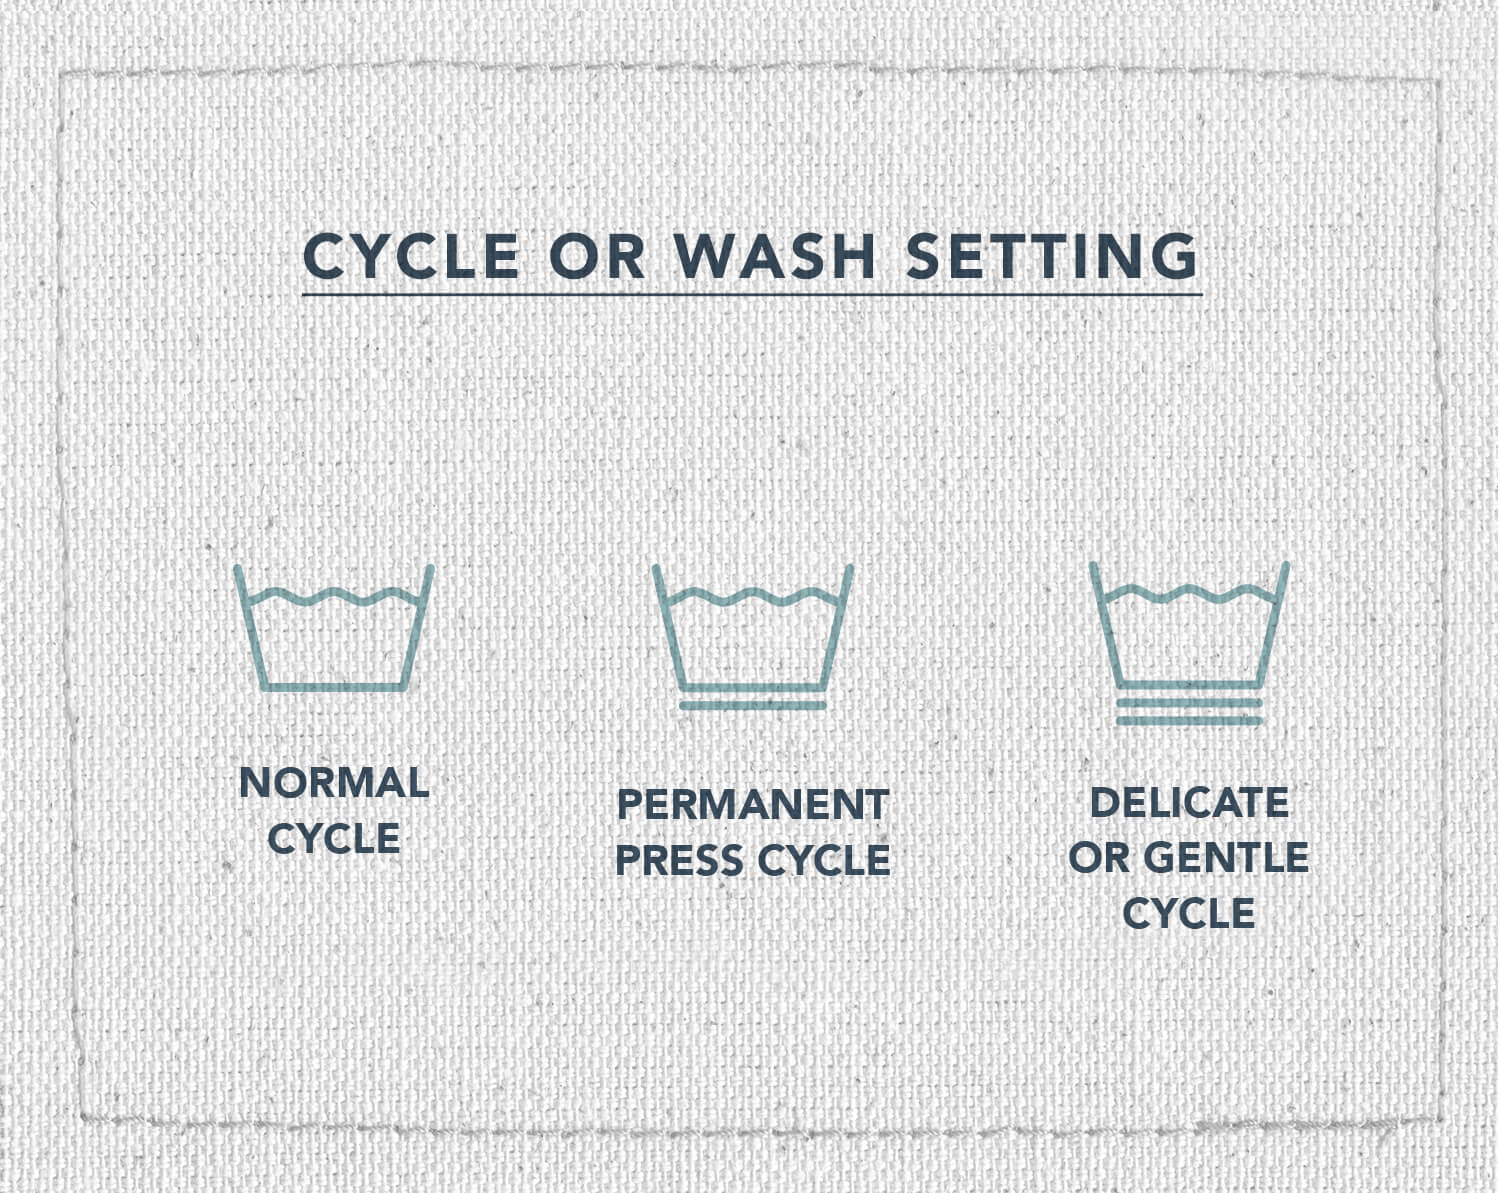 An infographic of three laundry care symbols, indicating what symbol means what cycle to wash your clothes on, normal cycle, permanent press cycle, or delicate or gentle cycle